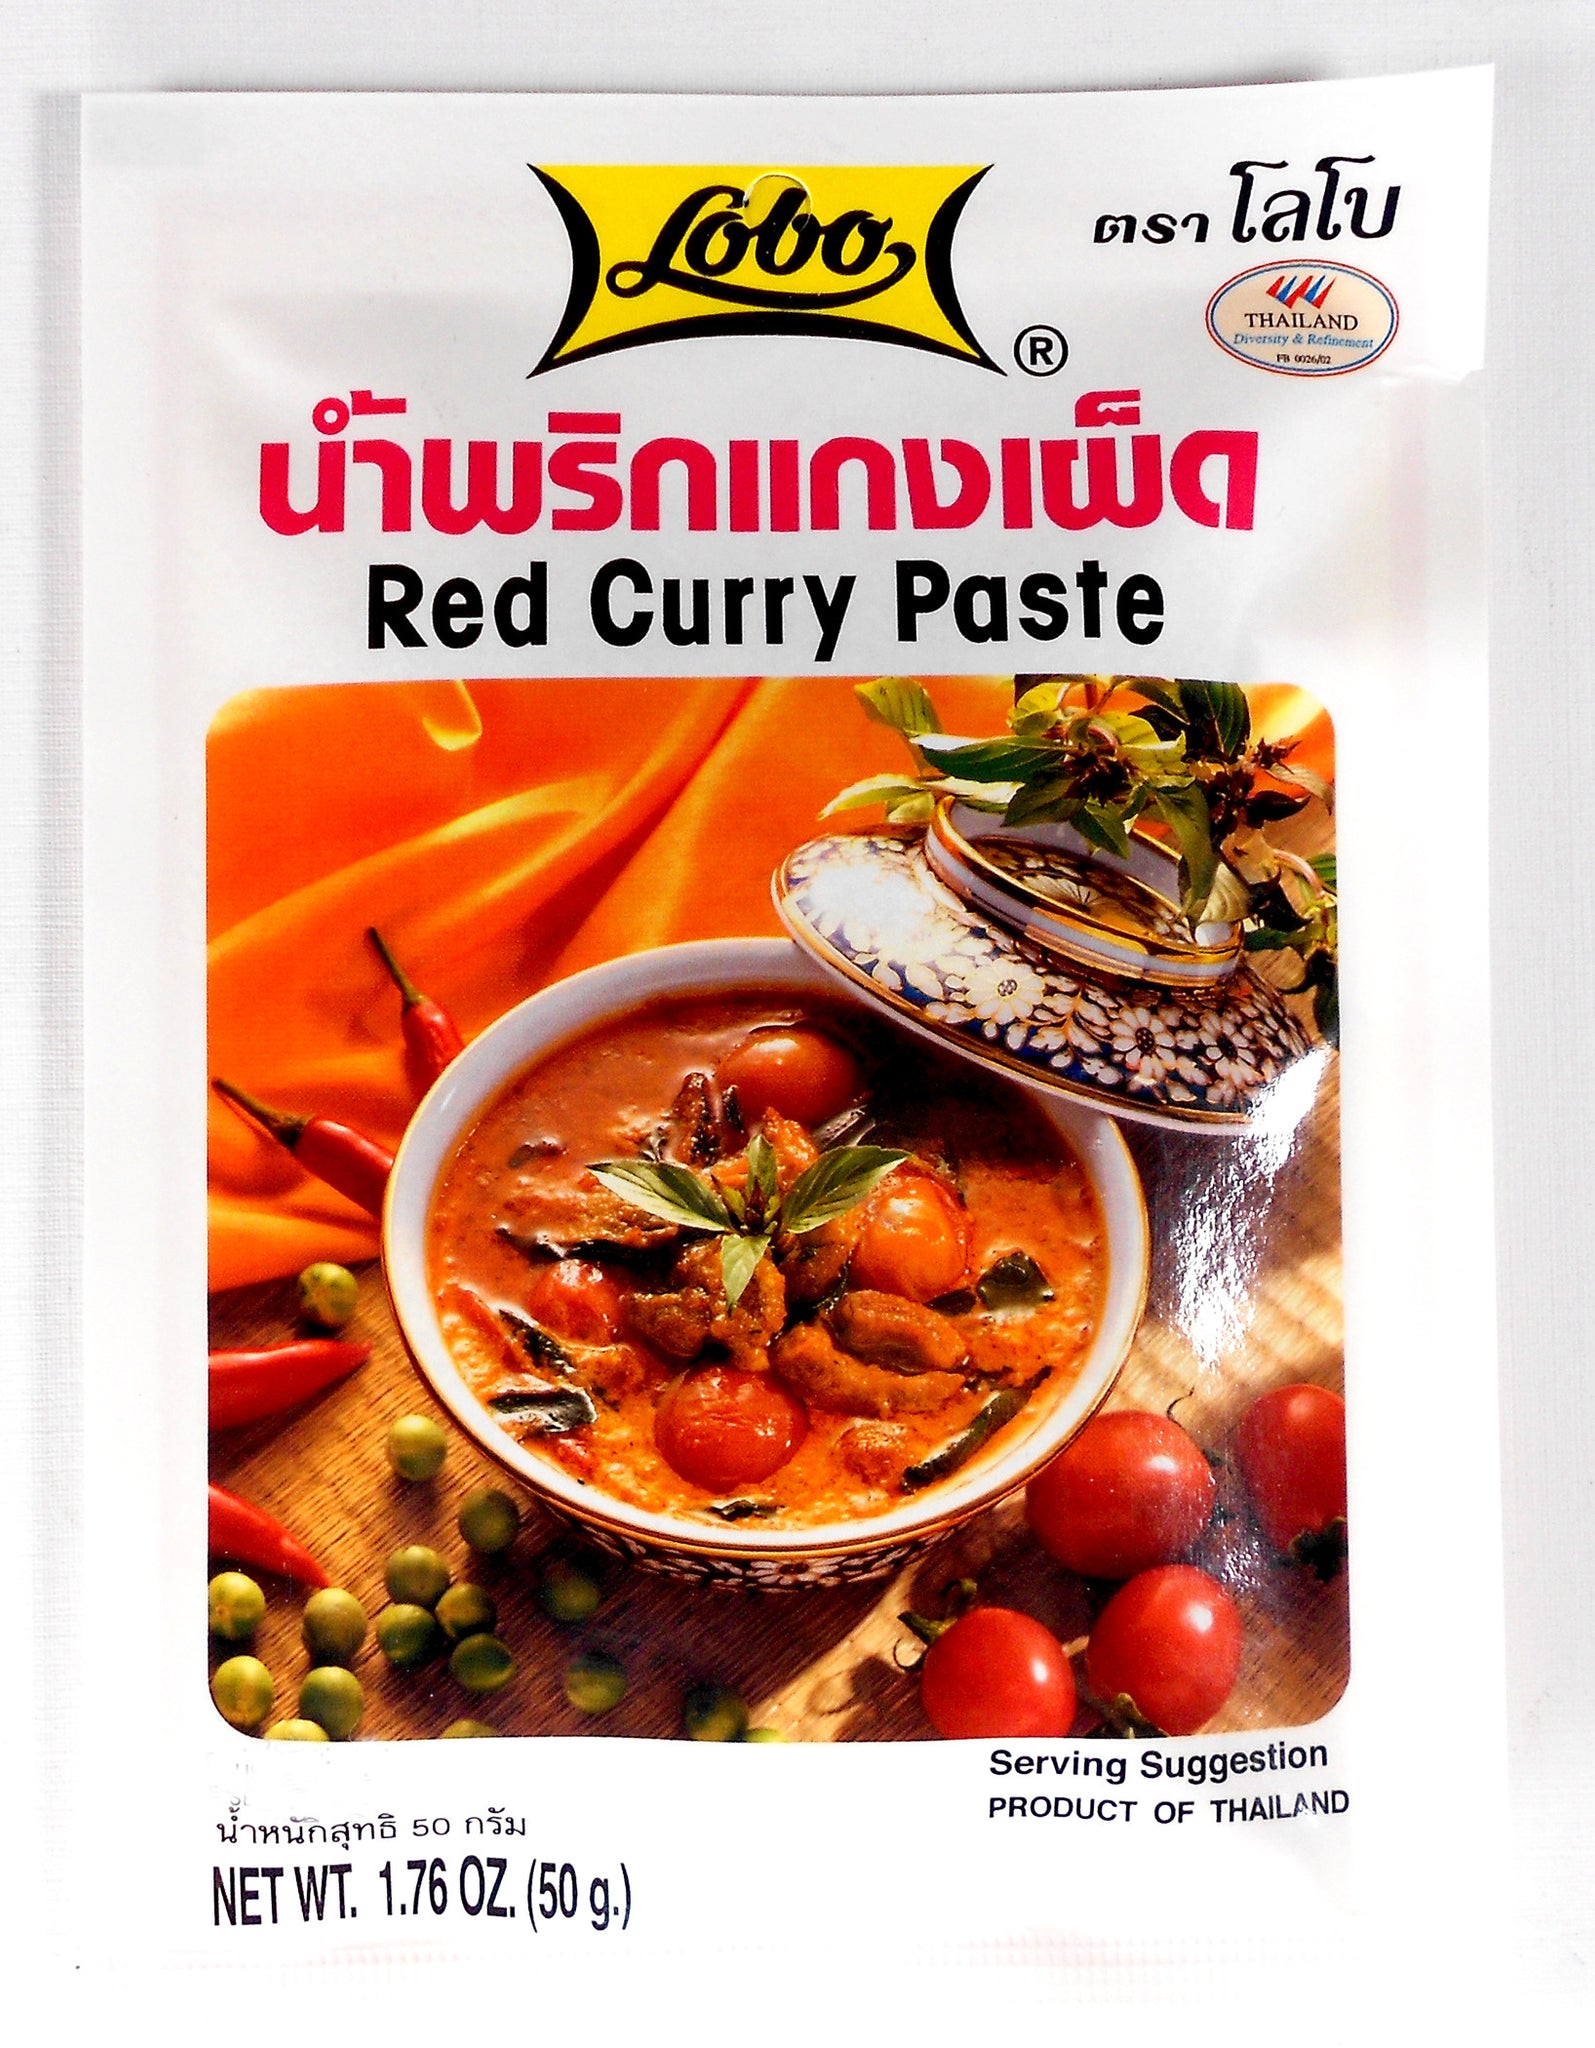 green vs red curry paste